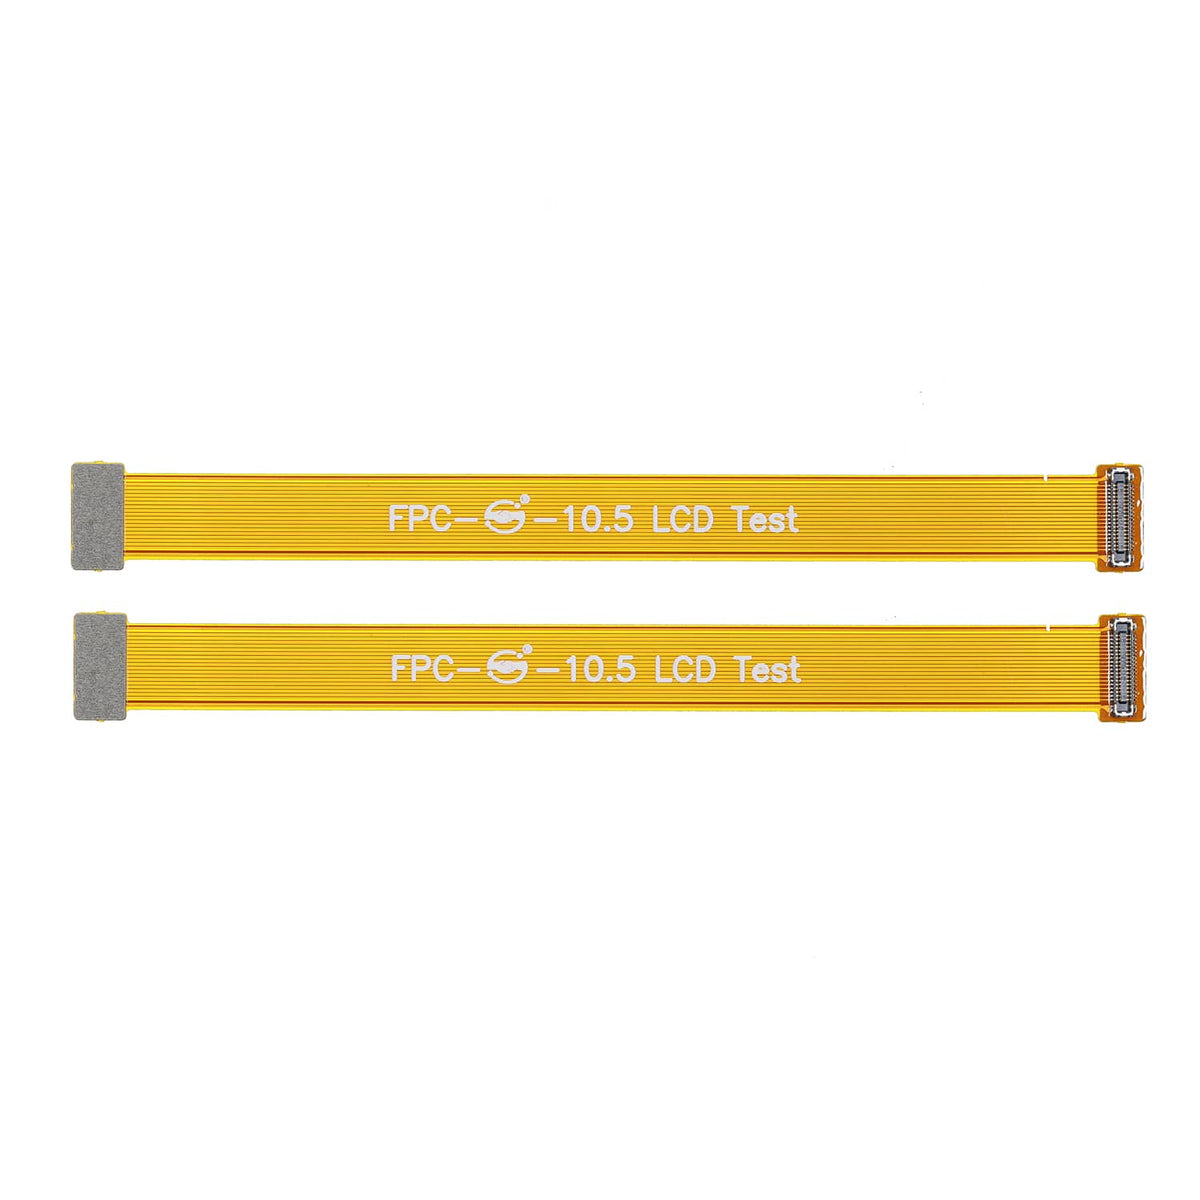 LCD TESTING CABLE (2PCS/SET) FOR IPAD PRO 10.5" 1ST GEN